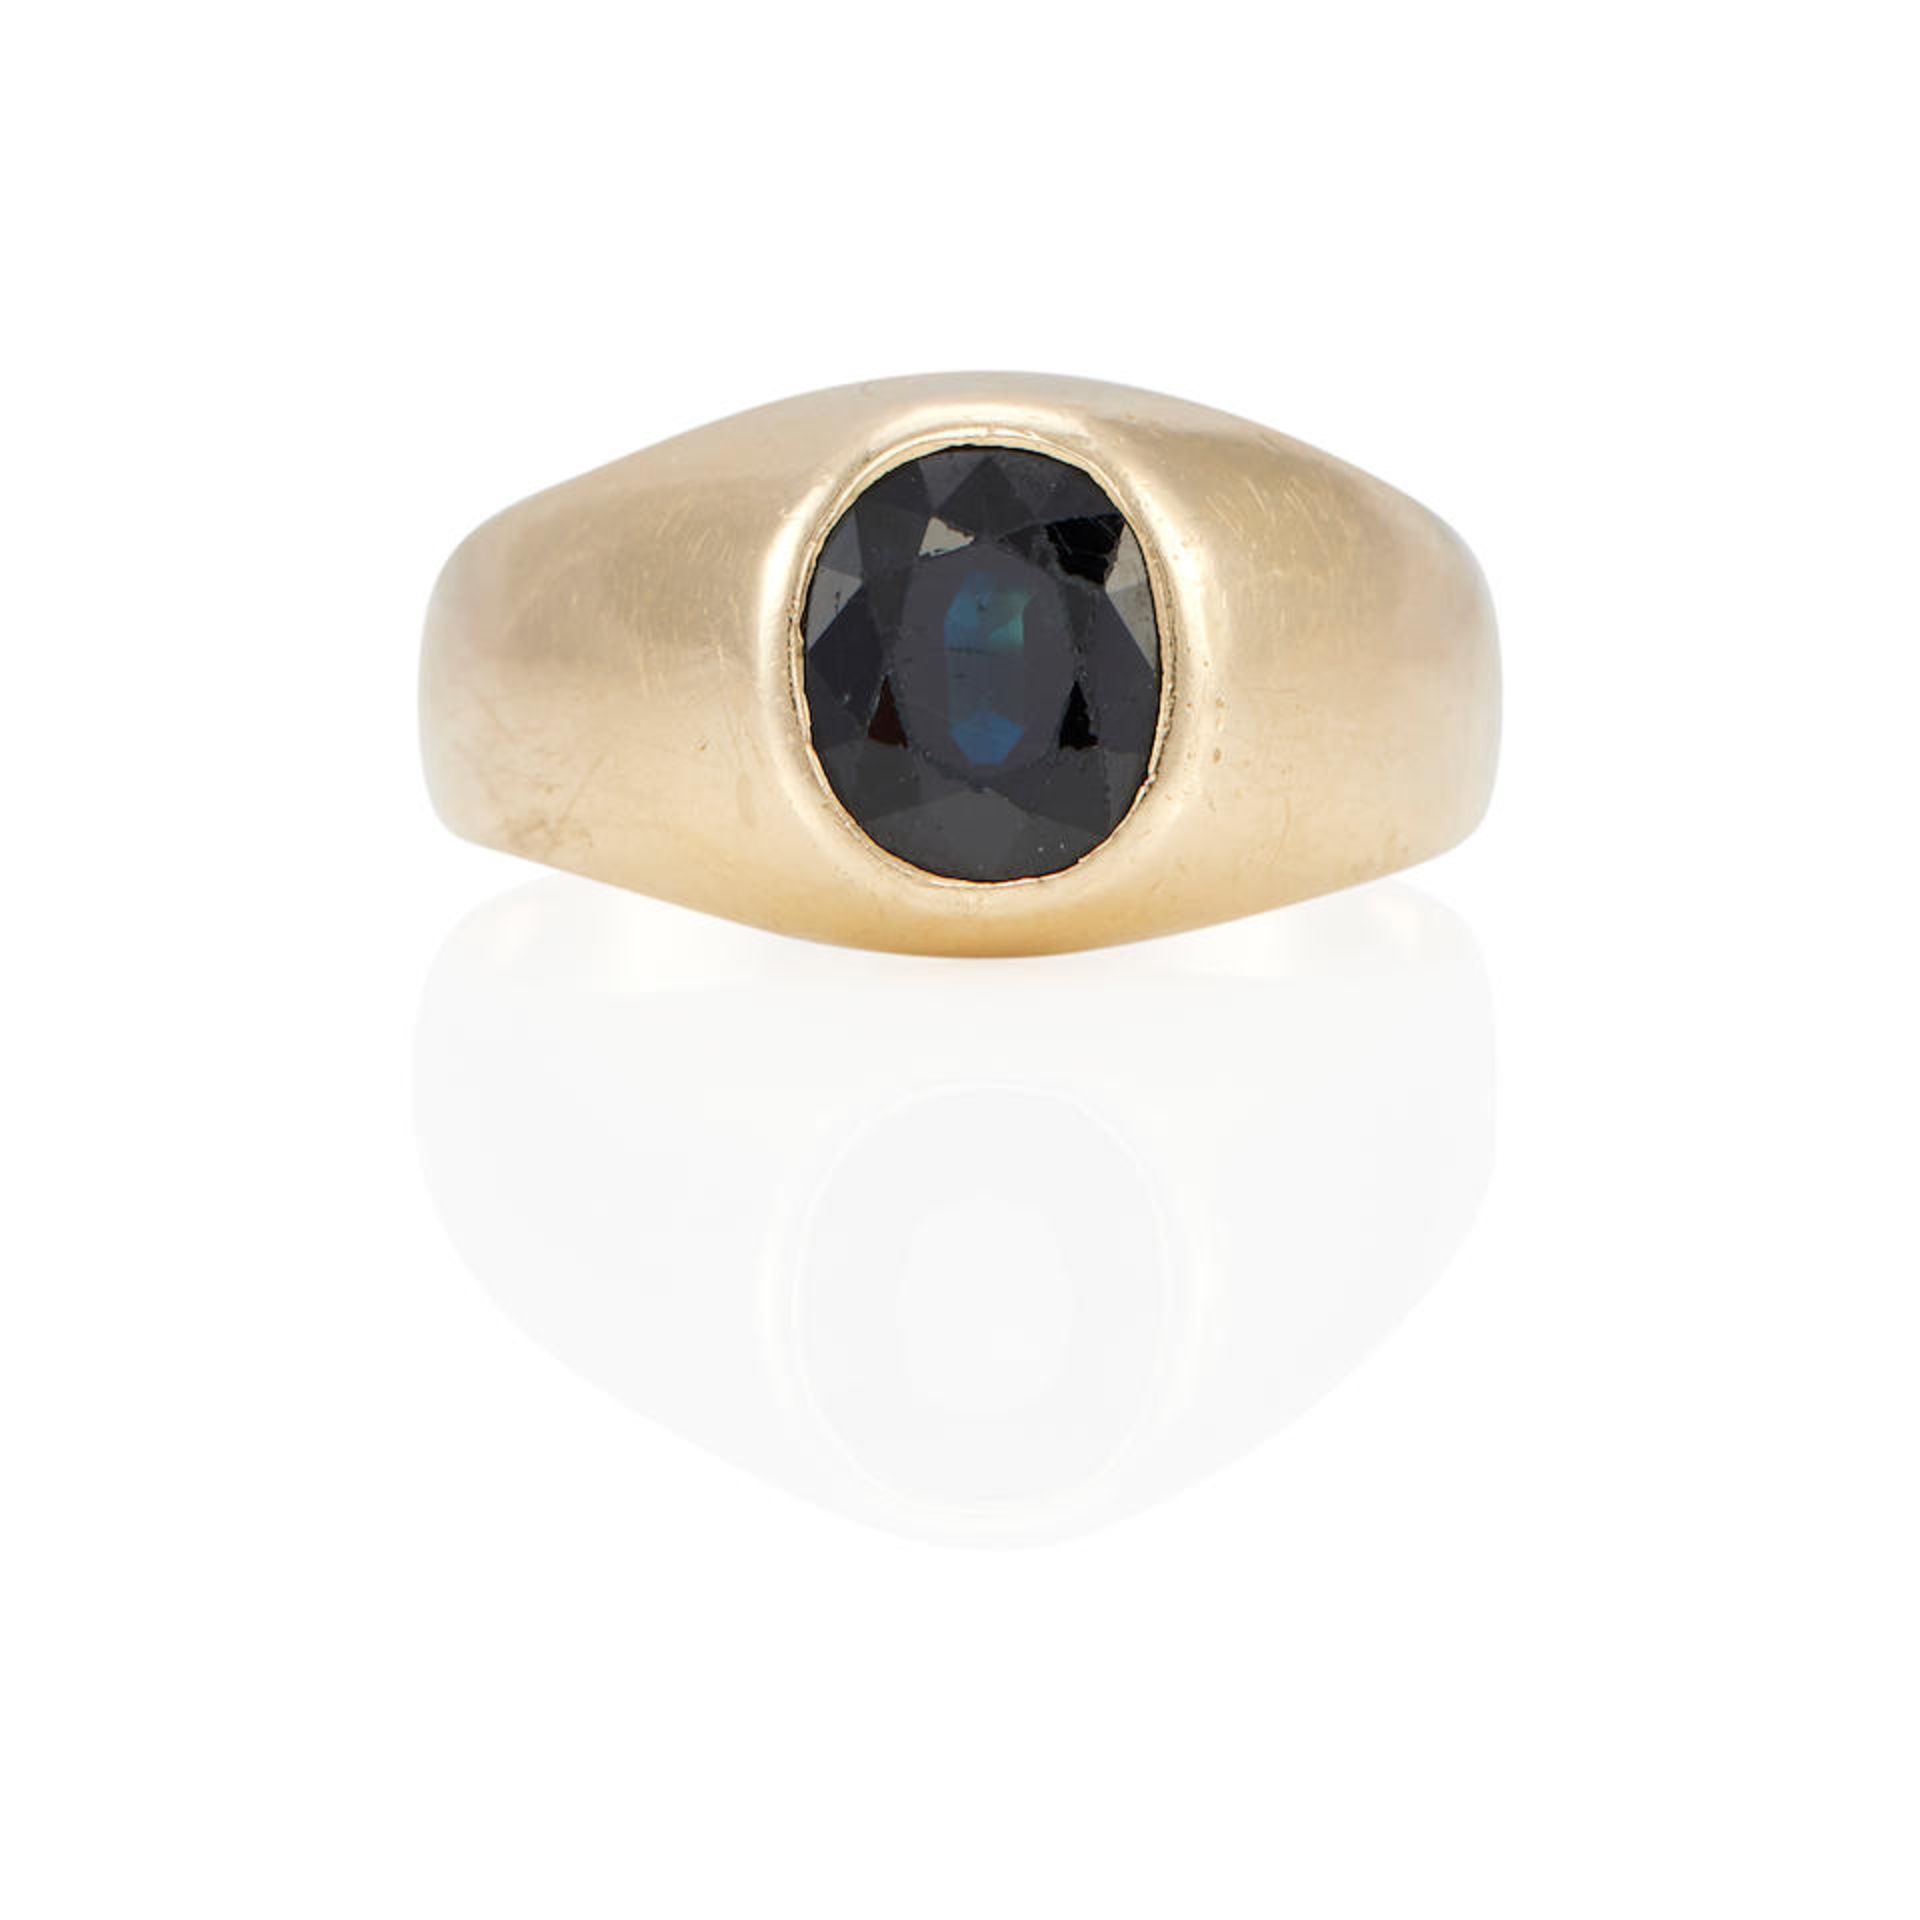 A 14K GOLD AND SAPPHIRE RING